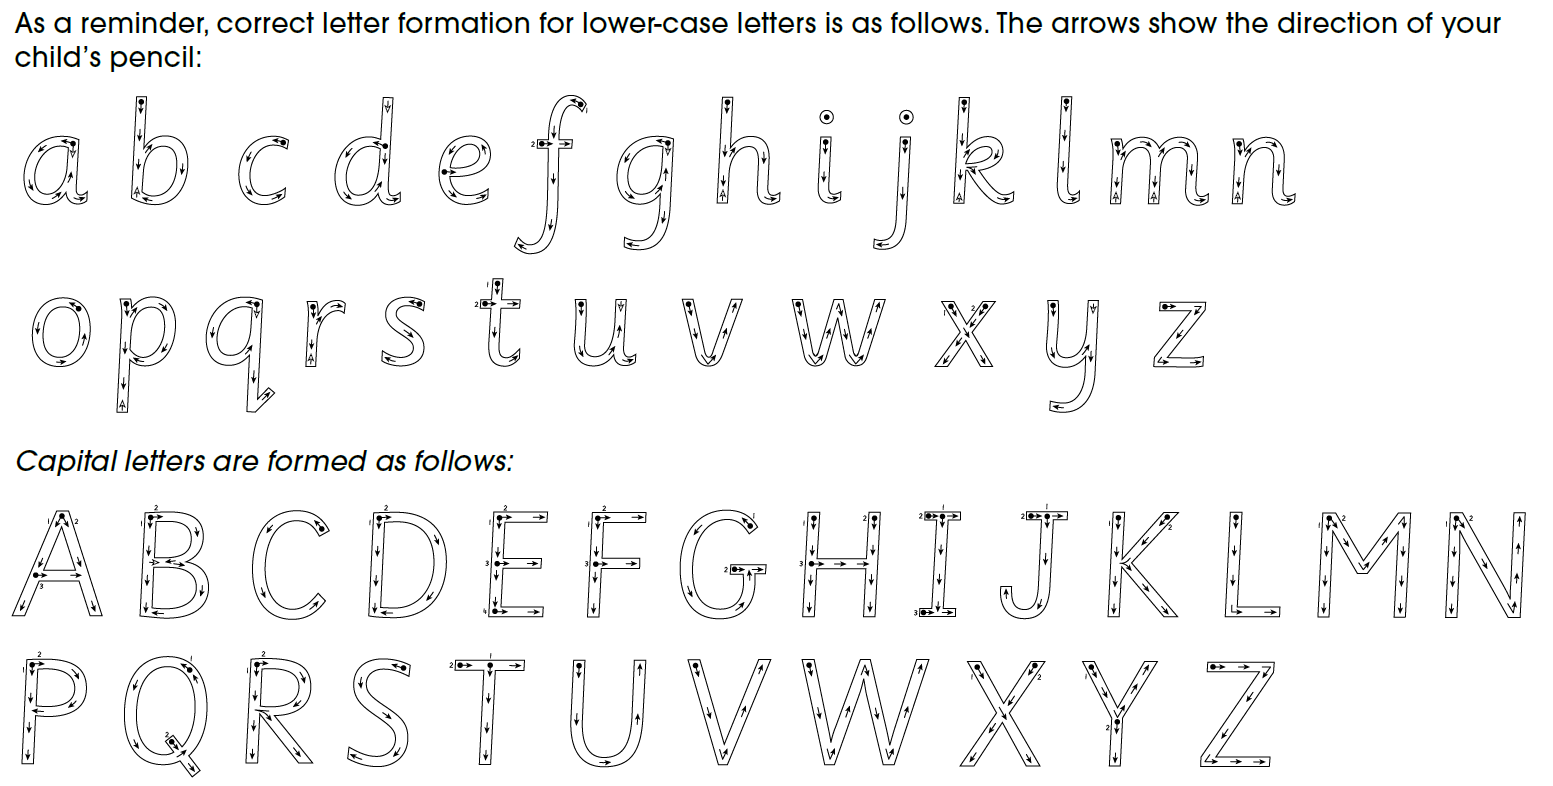 Handwriting and letter formation - Someries Infant School & Early